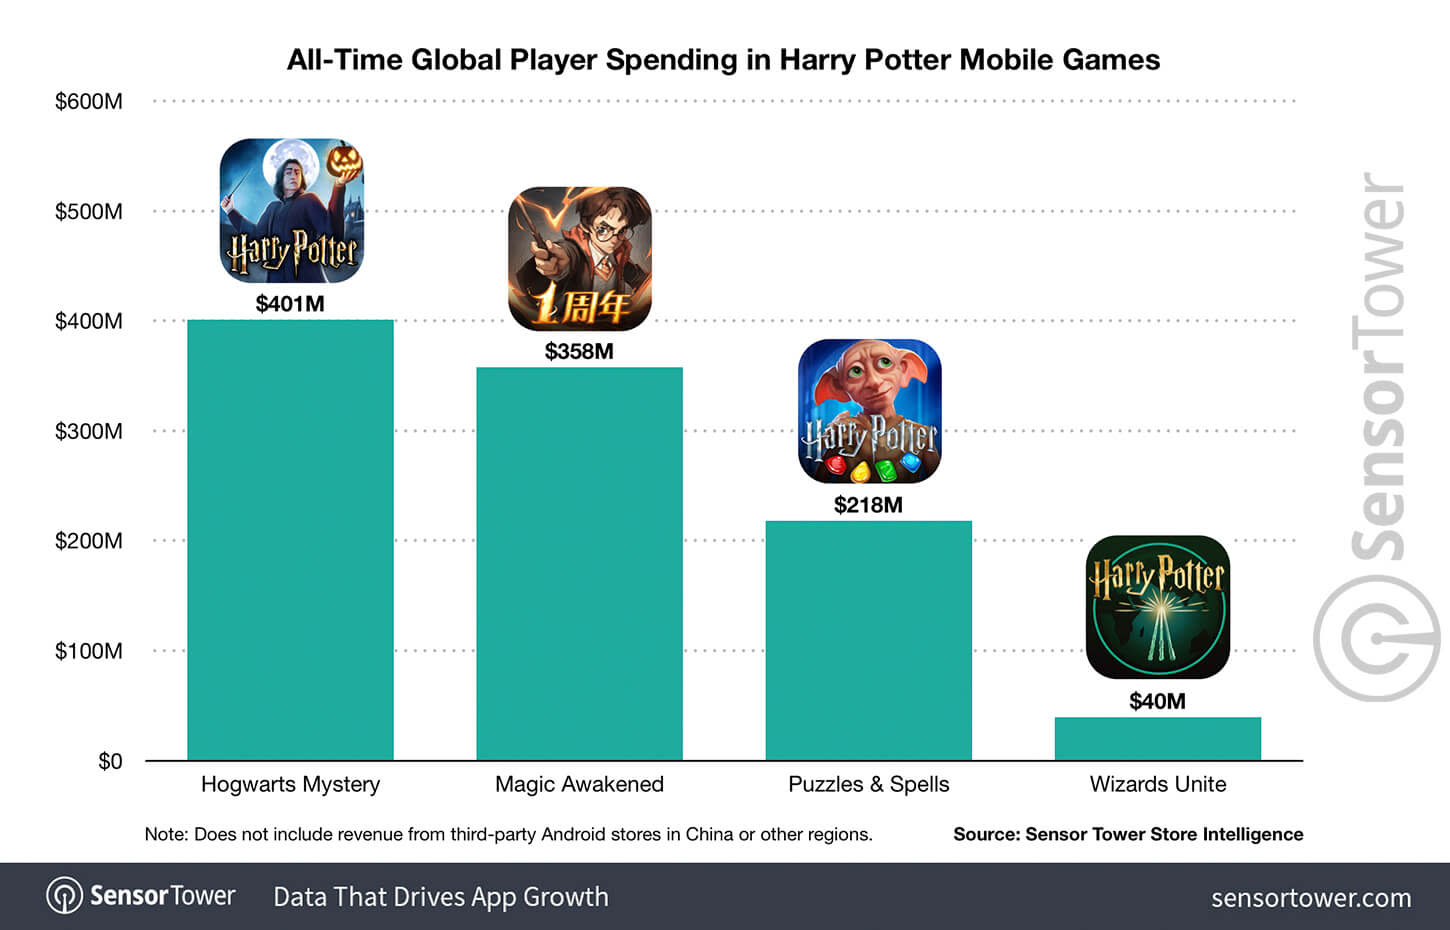 Top Harry Potter mobile games by revenue